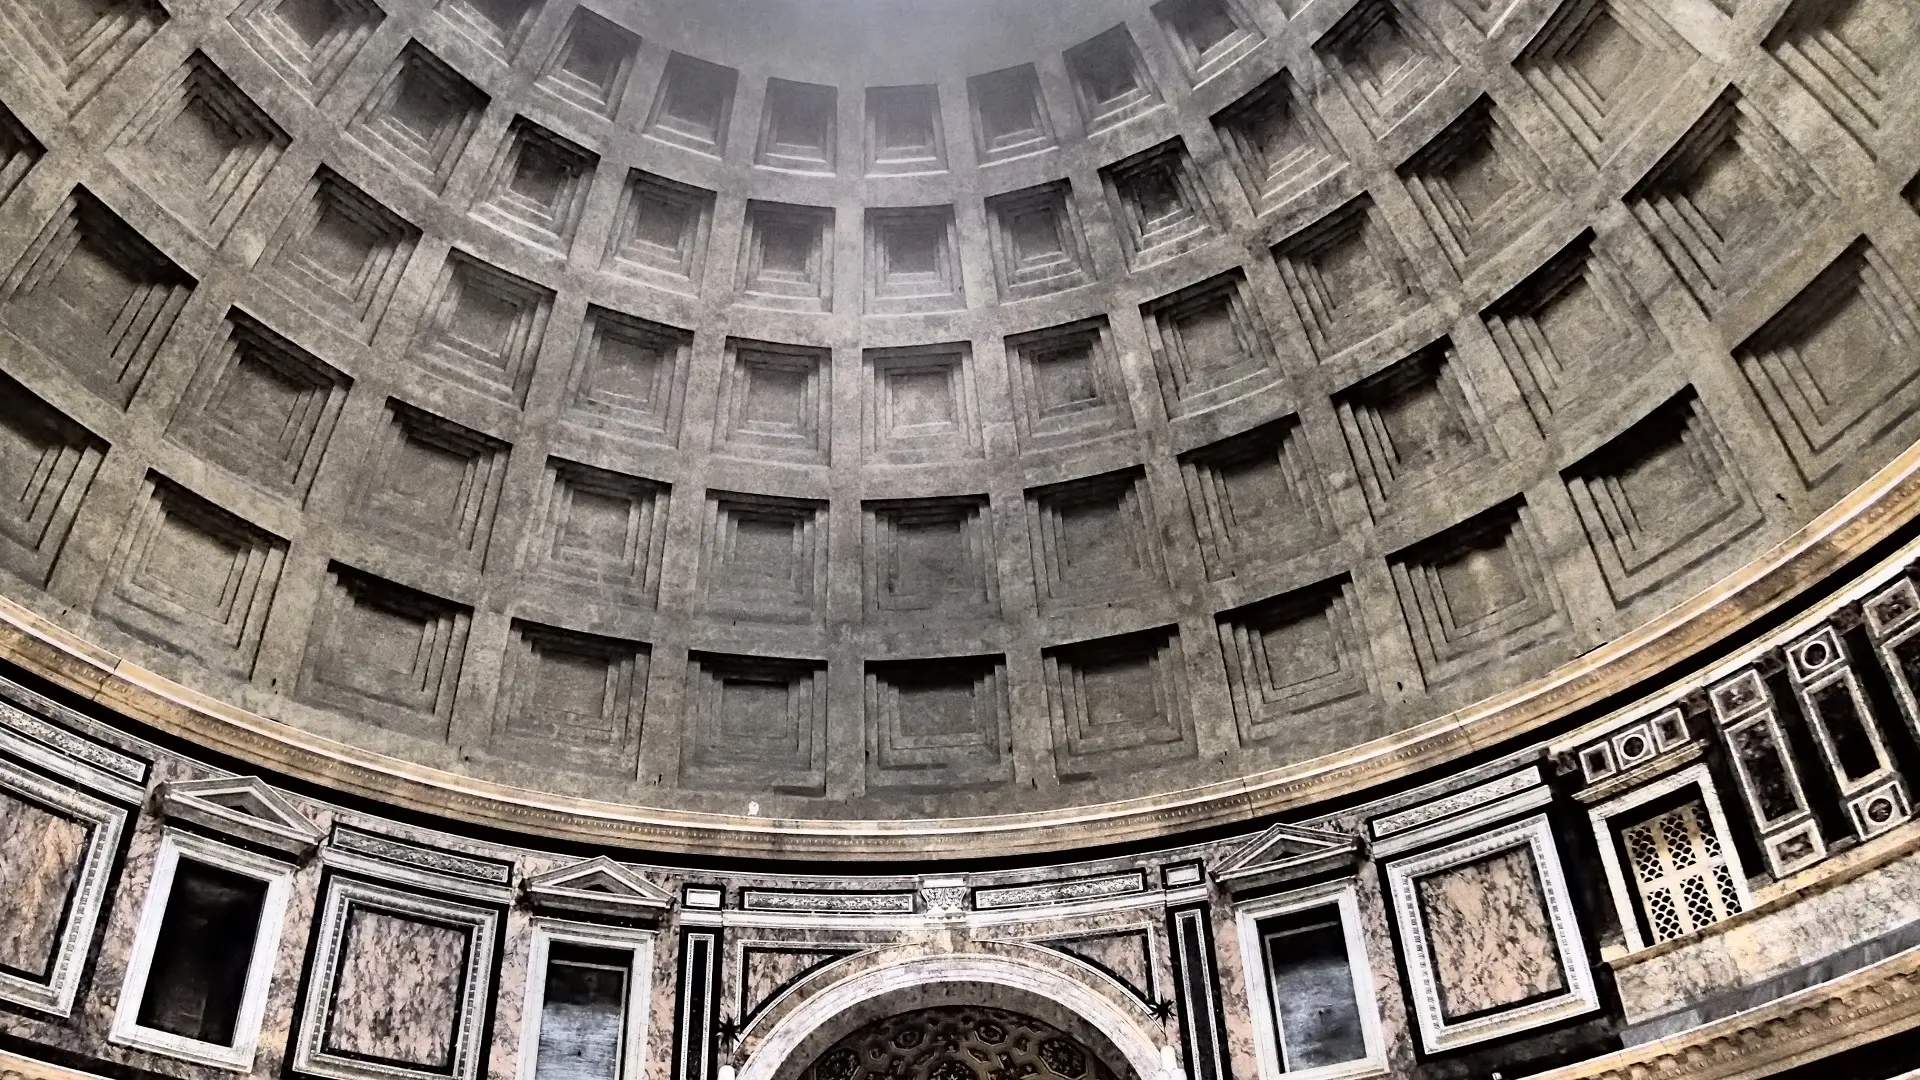 "Interior view of the Pantheon in Rome, showcasing its vast dome with the central oculus letting in natural light. The photo captures the grand columns, detailed sculptures, and the rich textures of the ancient walls, with visitors admiring the architectural marvel."